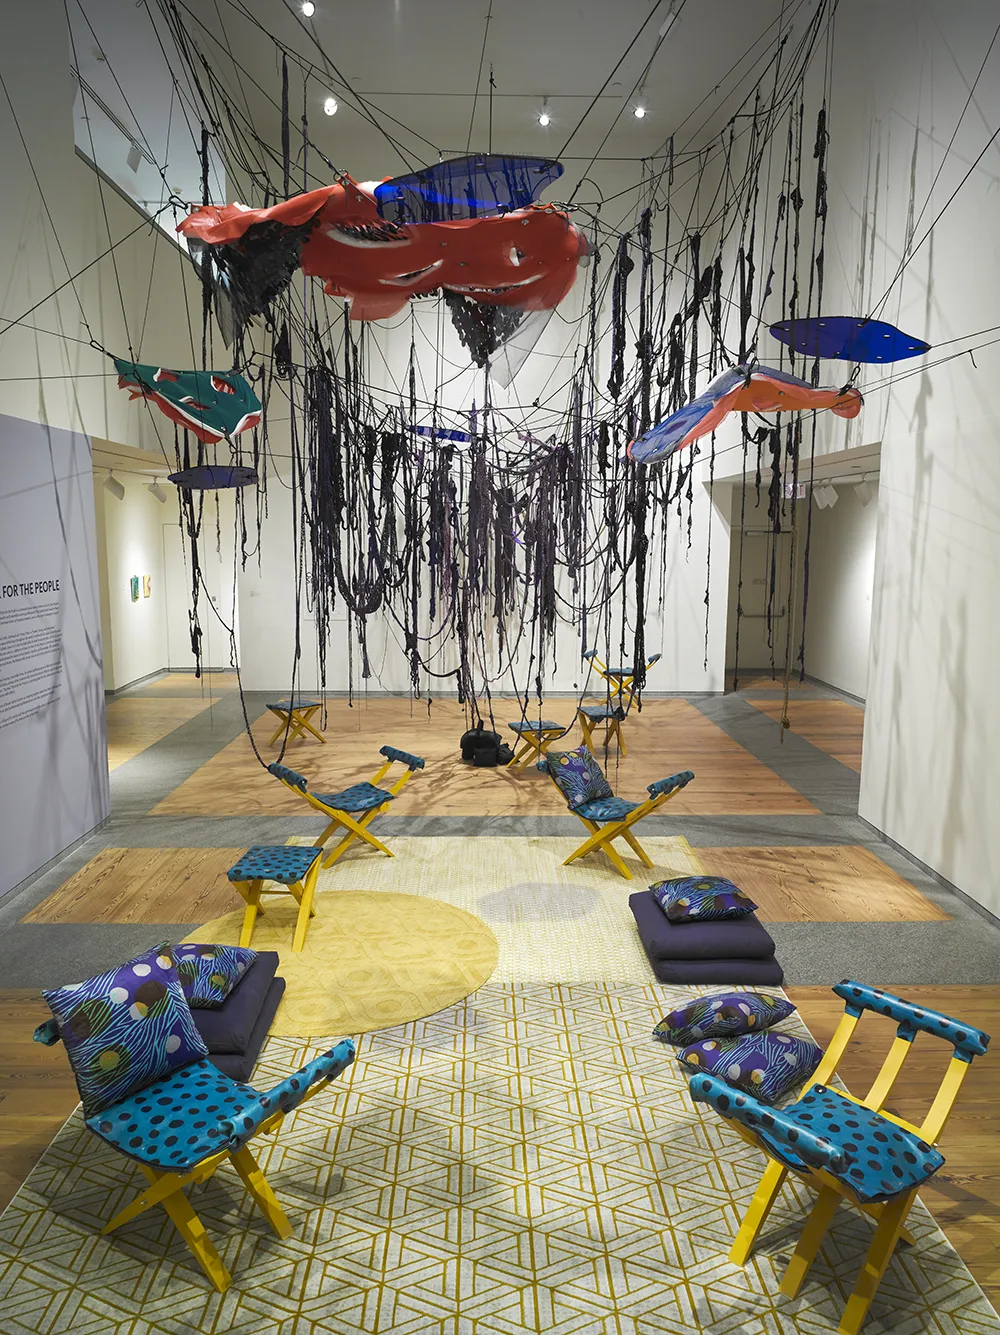 Gallery installation of blue and yellow patterned chairs, yellow patterned carpets, blue patterned pillows, and red, green, and blue hanging from the ceiling.